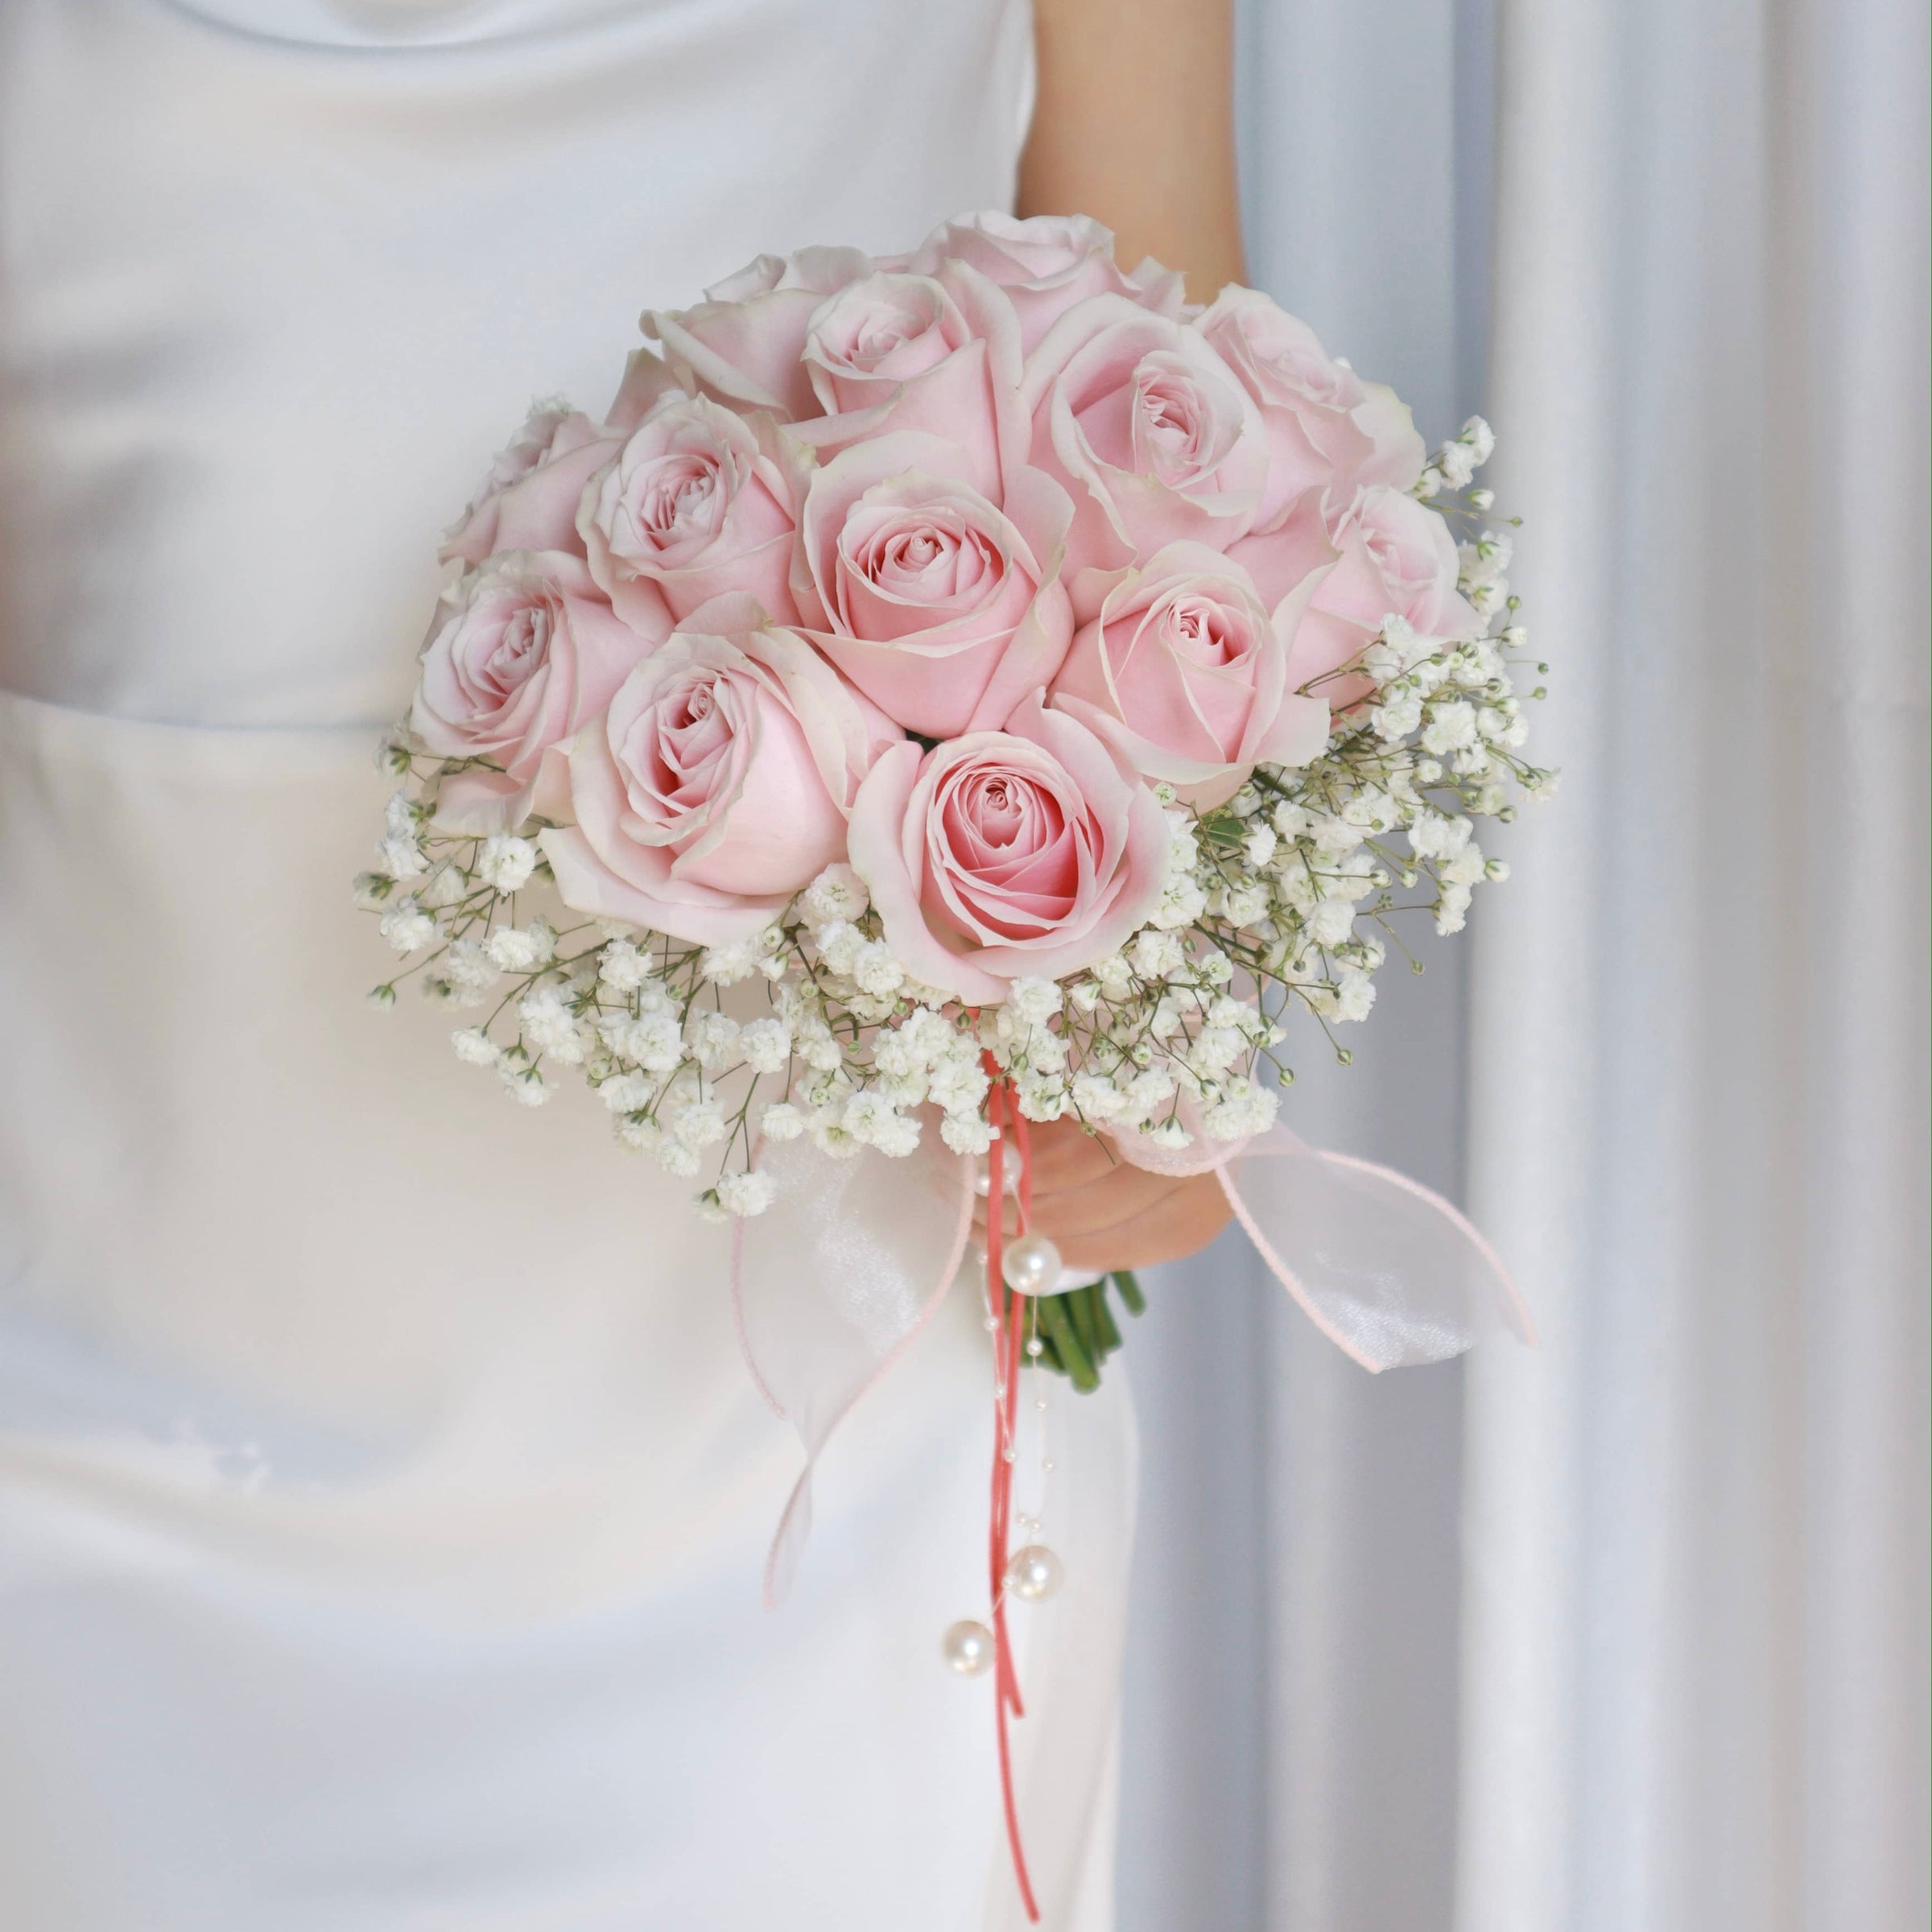 Express Your Love With Our Pink Rose With Baby's Breath Bridal Bouquet -  Shop Our Exclusive Flower | White Dew Flower